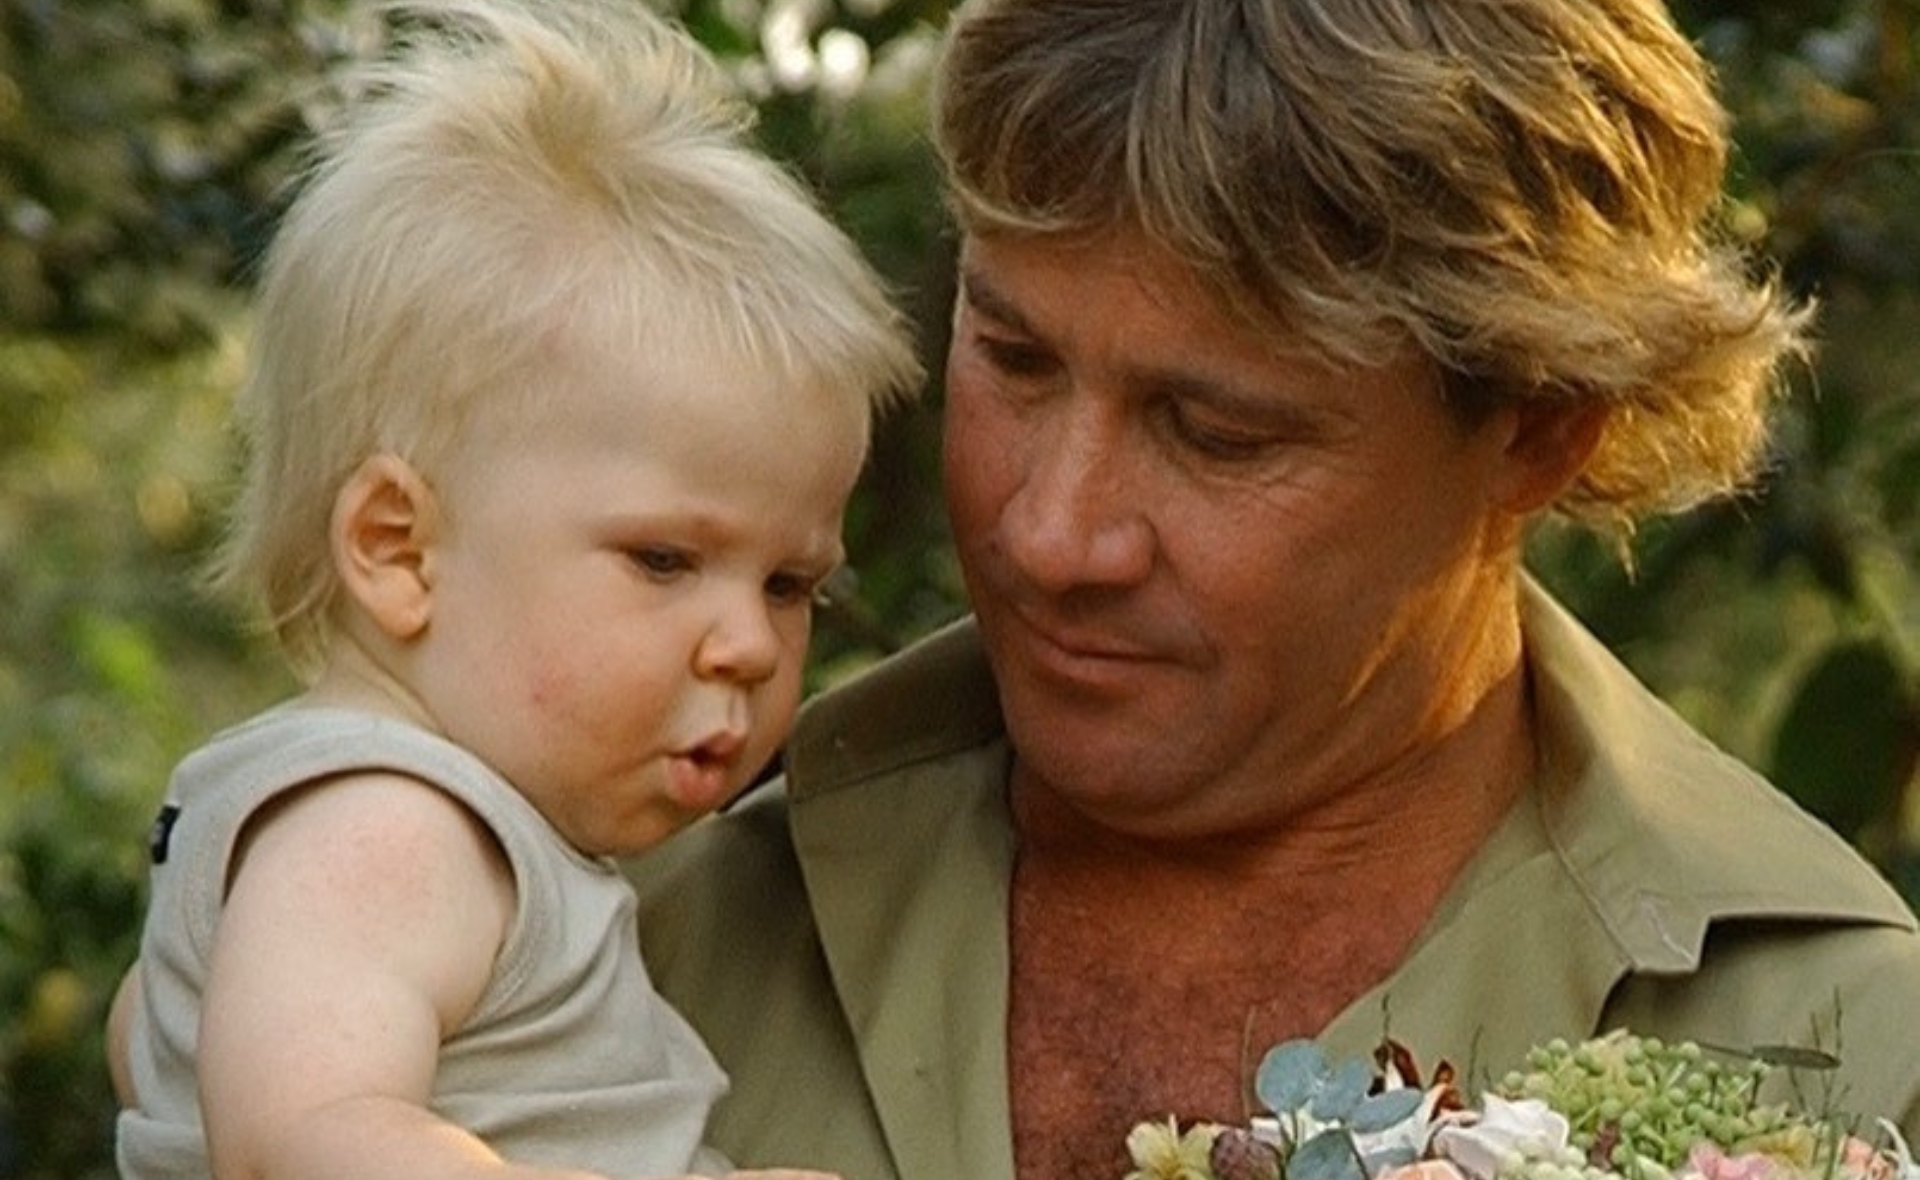 “It’s heartbreaking”: Robert Irwin opens up about family disease which impacts thousands of people